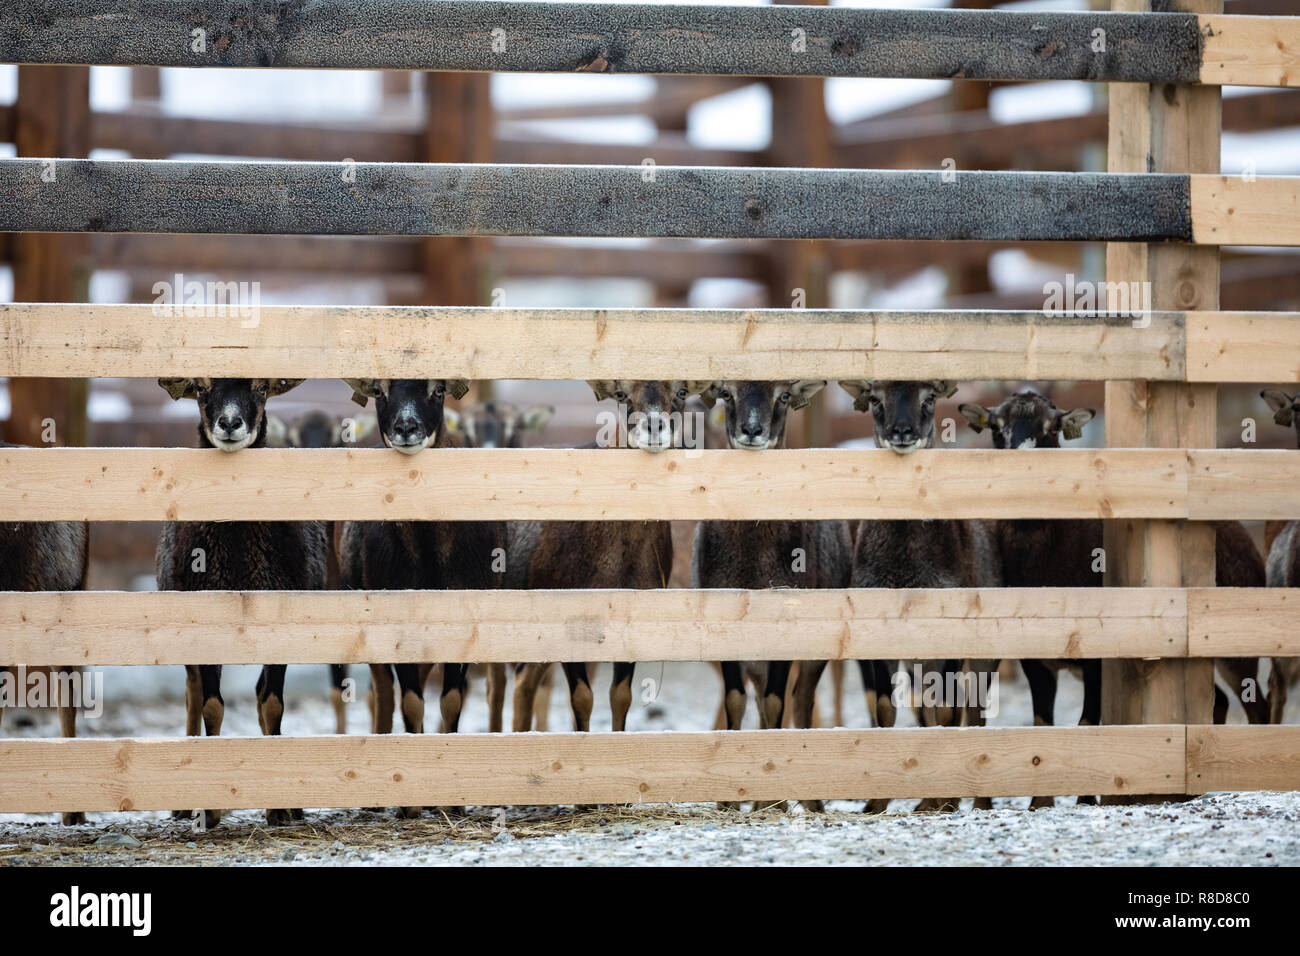 Cute adorable farm goats standing in a row Stock Photo